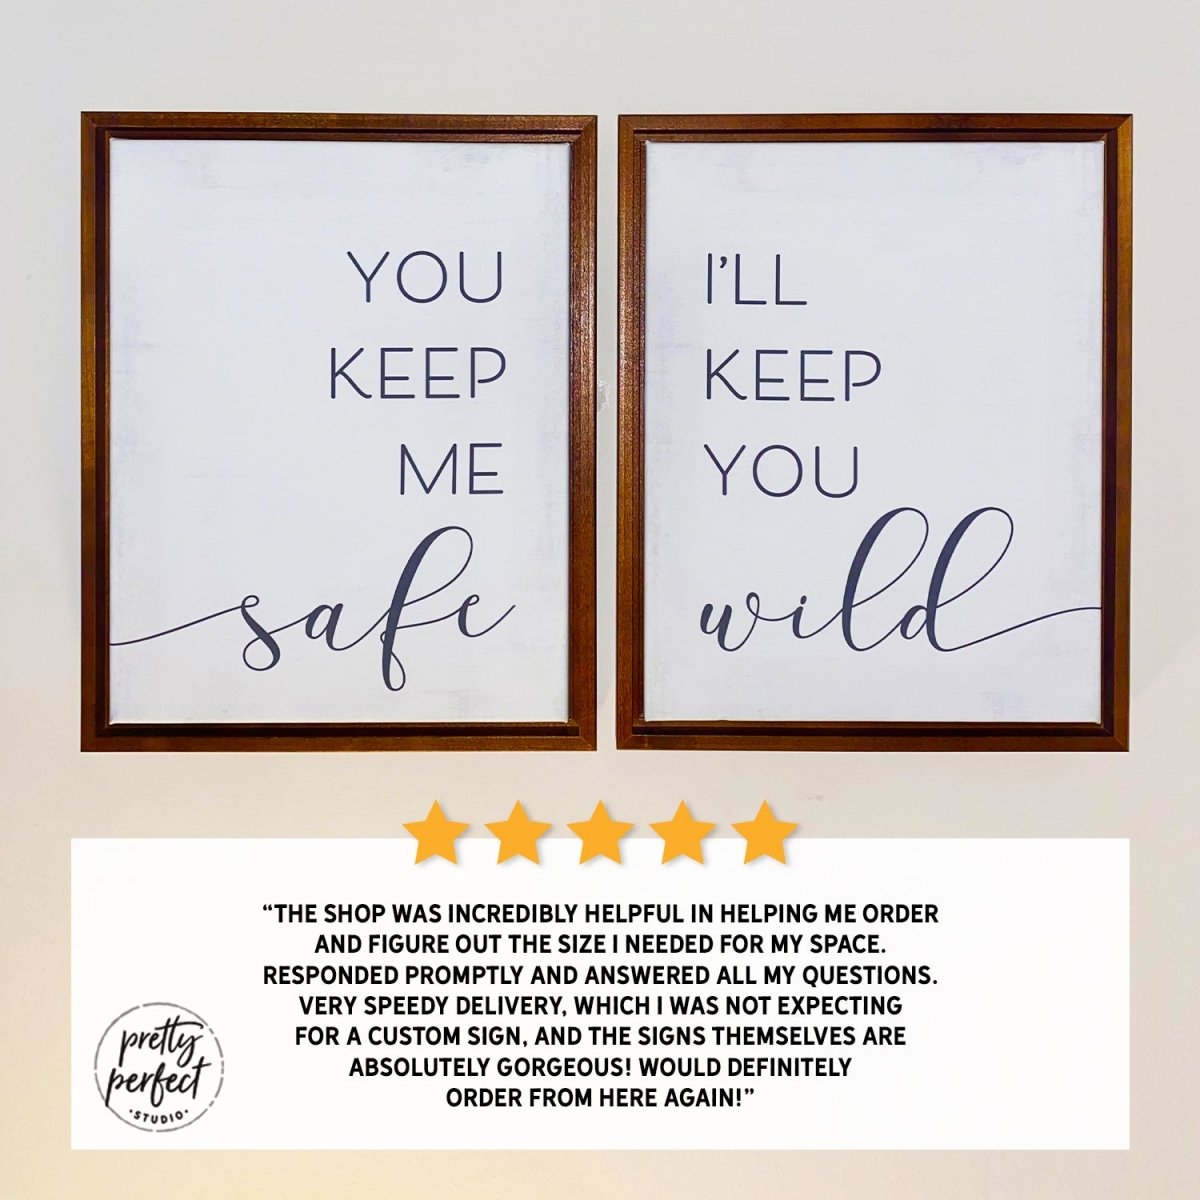 Customer product review for you keep me safe sign by Pretty Perfect Studio